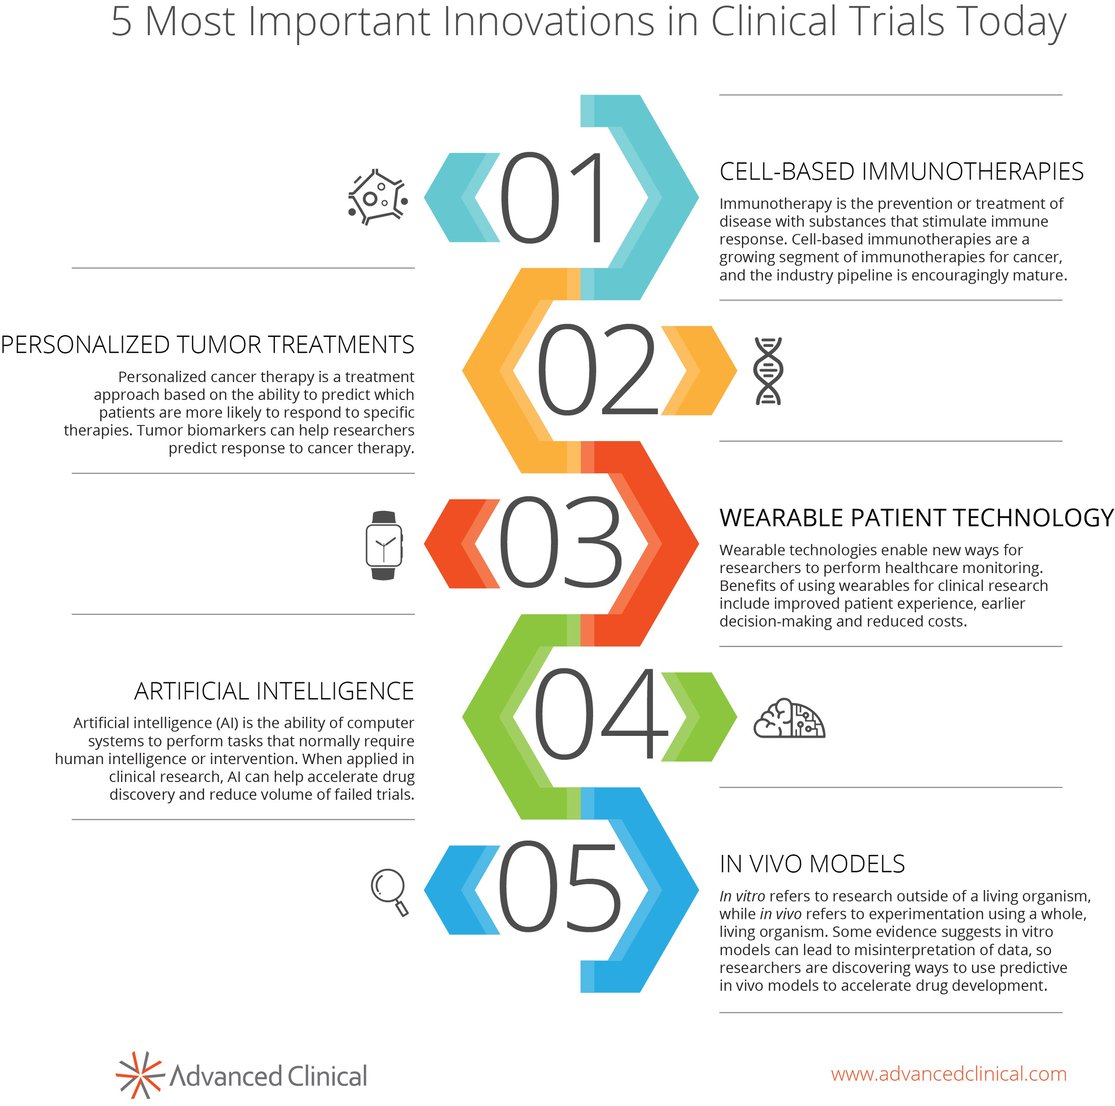 Infographic_5 Most Important Innovations-1.jpg